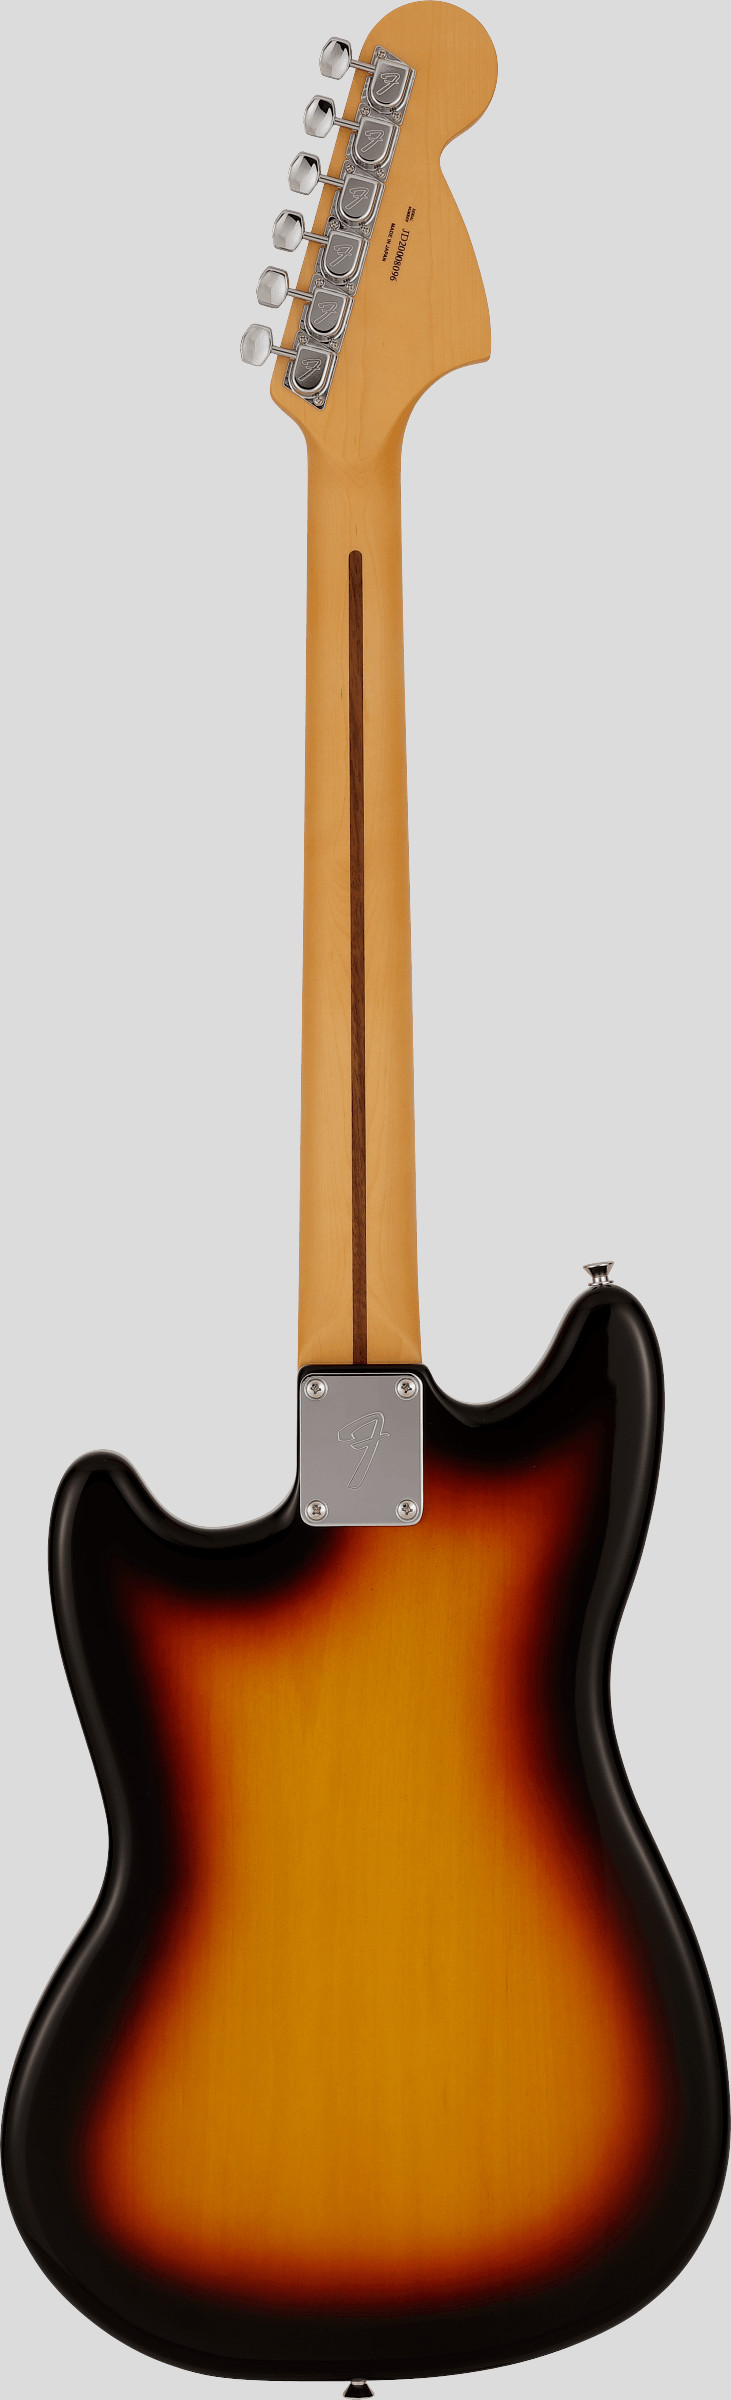 Fender Limited Edition Traditional Mustang Reverse Head 3-Color Sunburst 2